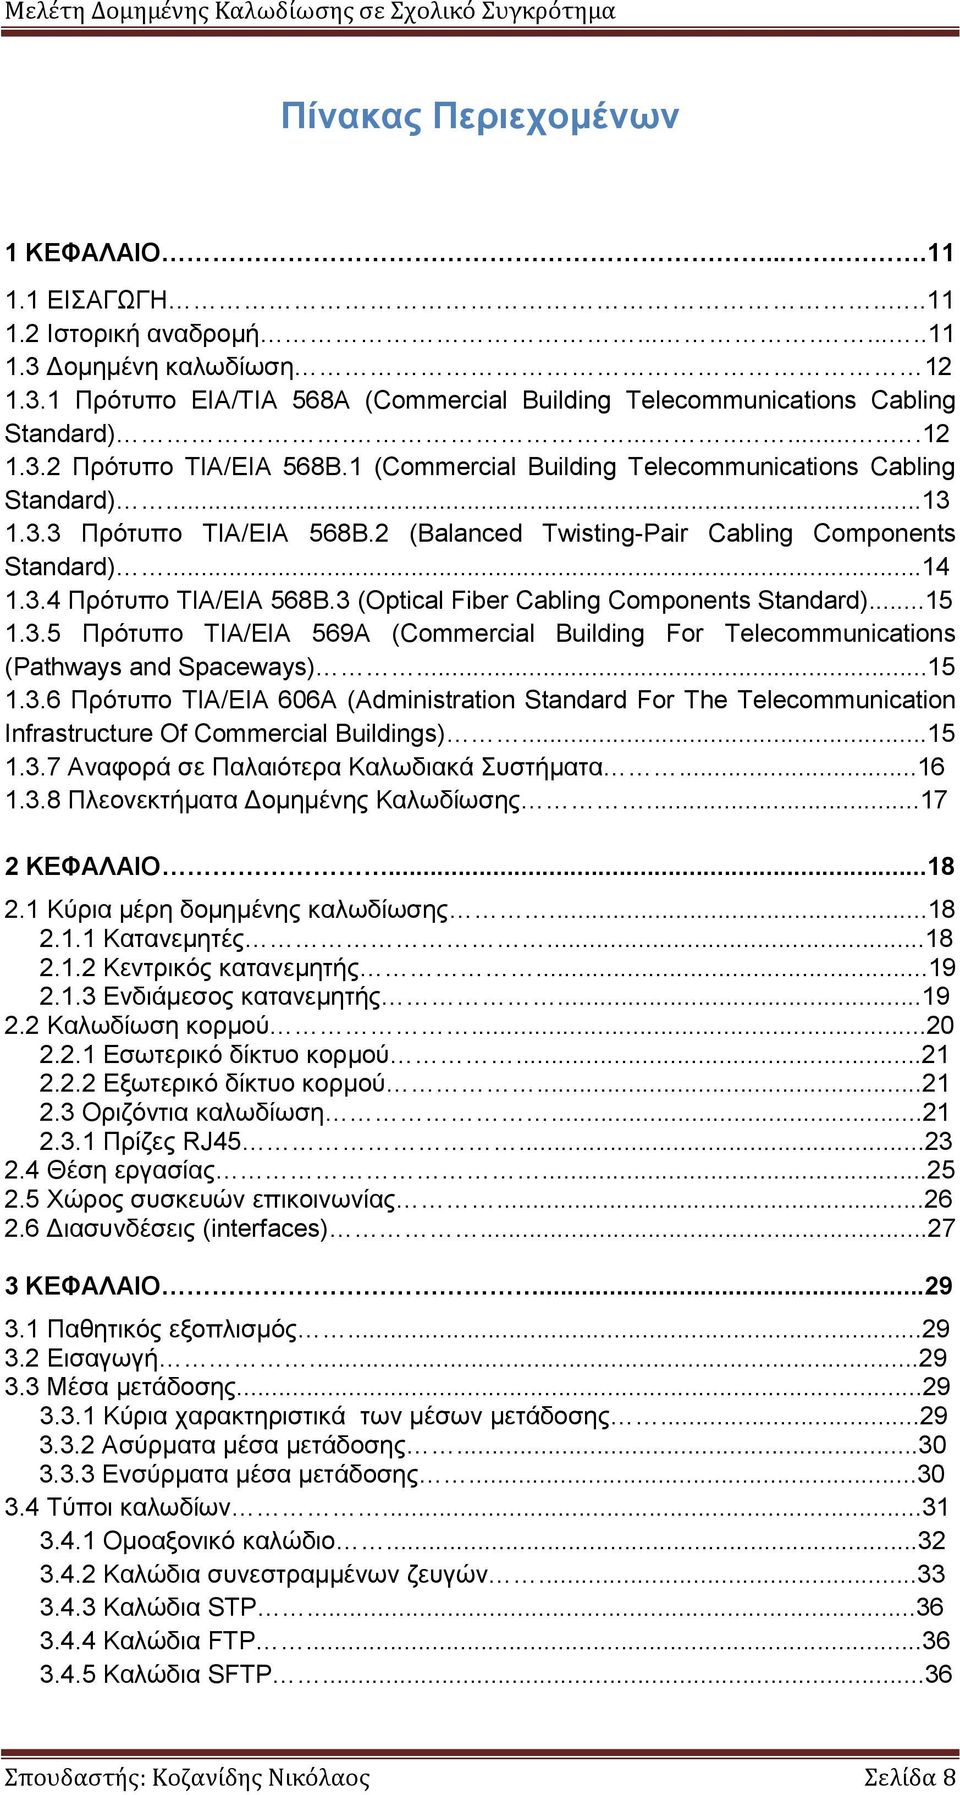 3 (Optical Fiber Cabling Components Standard)...15 1.3.5 Πρότυπο ΤΙΑ/ΕΙΑ 569A (Commercial Building For Telecommunications (Pathways and Spaceways)...15 1.3.6 Πρότυπο ΤΙΑ/ΕΙΑ 606A (Administration Standard For The Telecommunication Infrastructure Of Commercial Buildings).